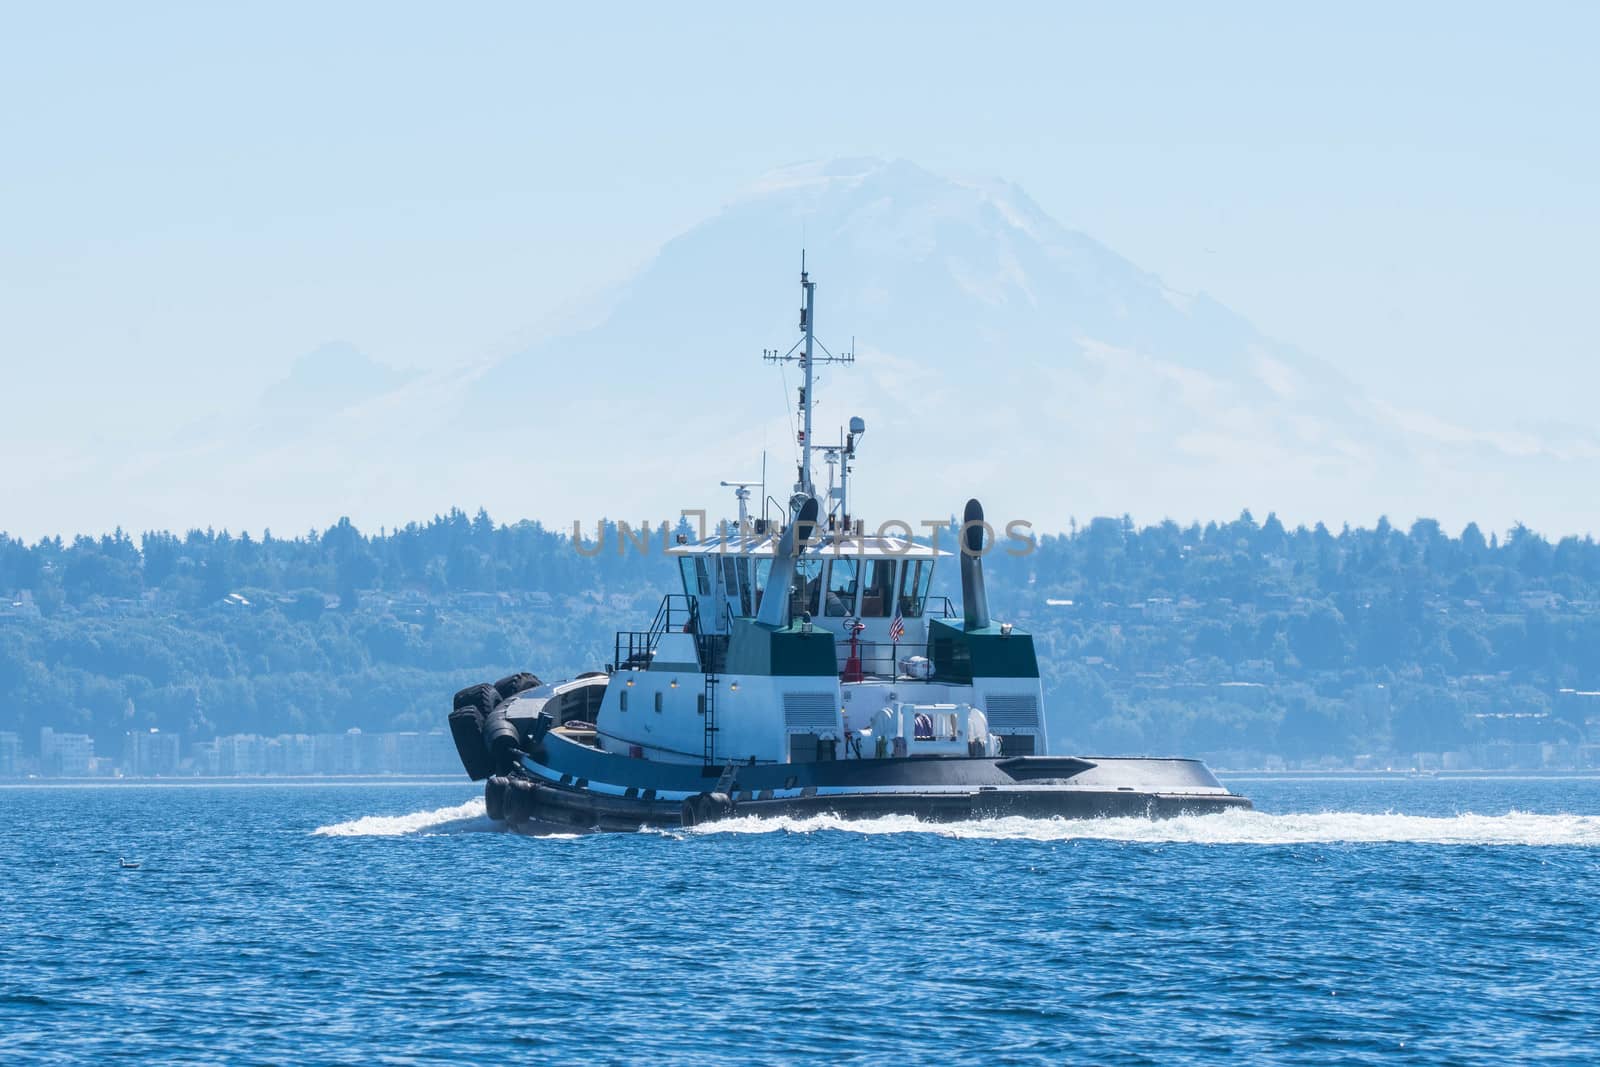 Offshore Tug on Puget Sound by cestes001